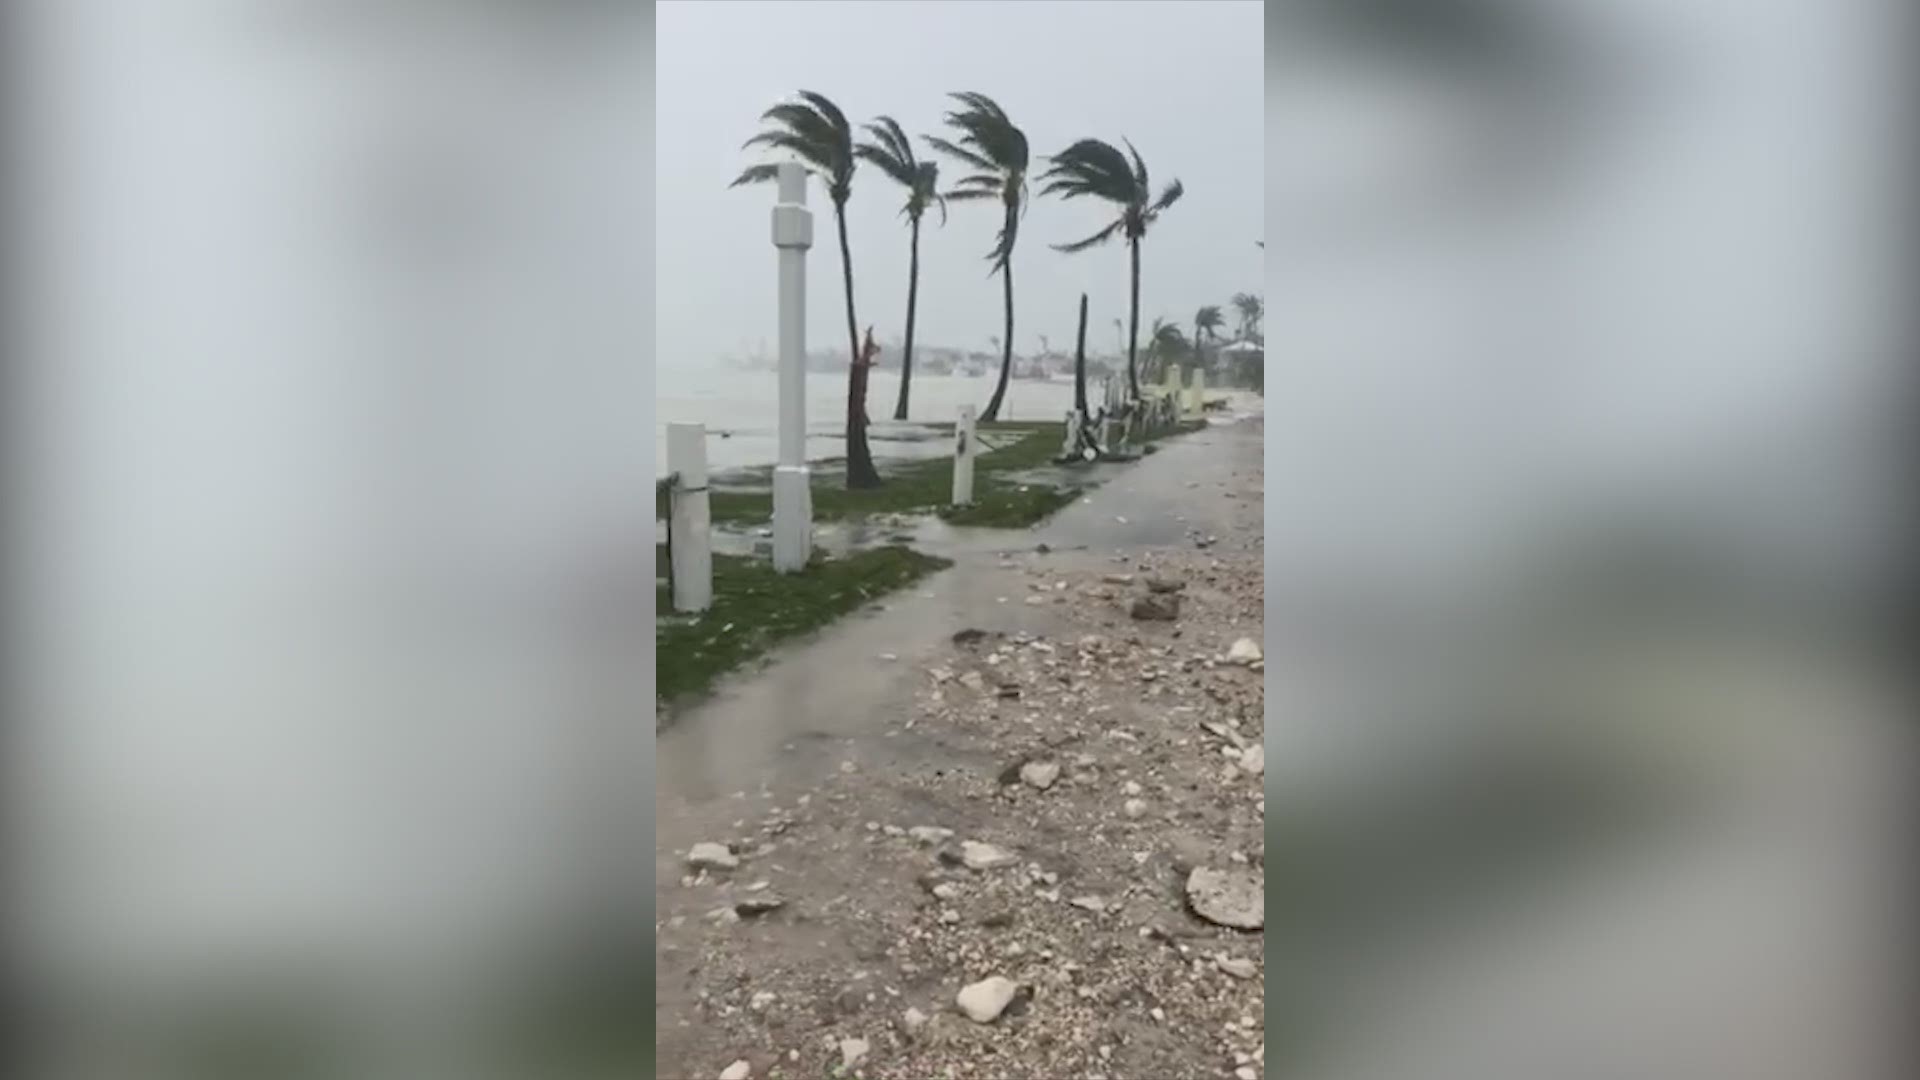 Chris Appleby was in a home that was supposed to withstand the massive storm, but it and his business were "wiped out" by Hurricane Dorian. This is video showing the damage done to the Bahamas.